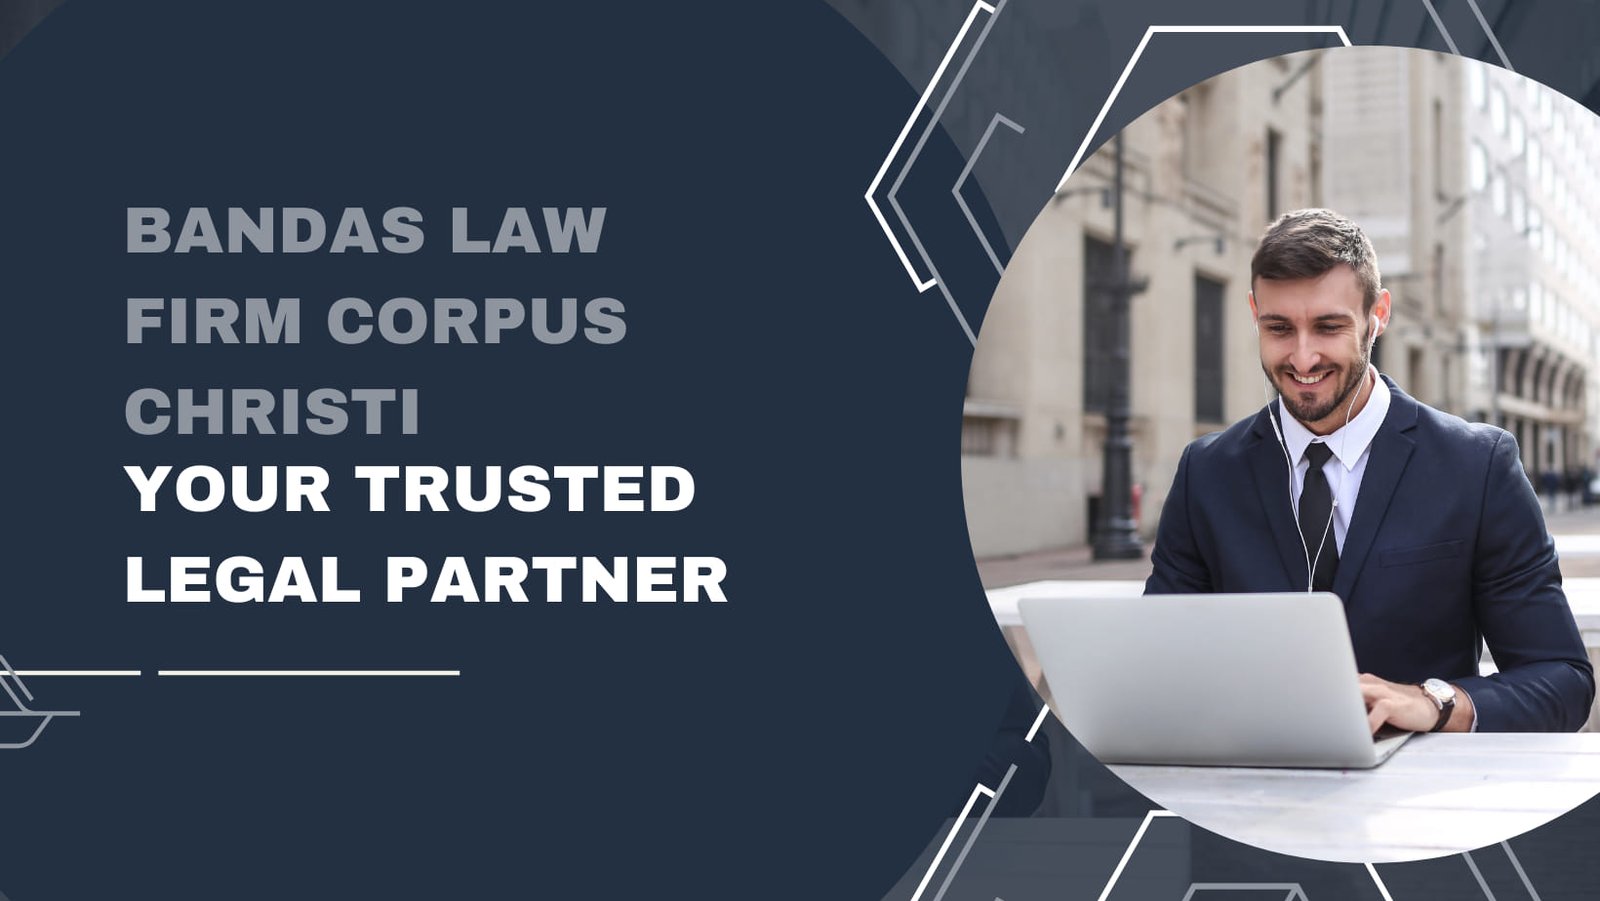 Bandas Law Firm Corpus Christi: Your Trusted Legal Partner